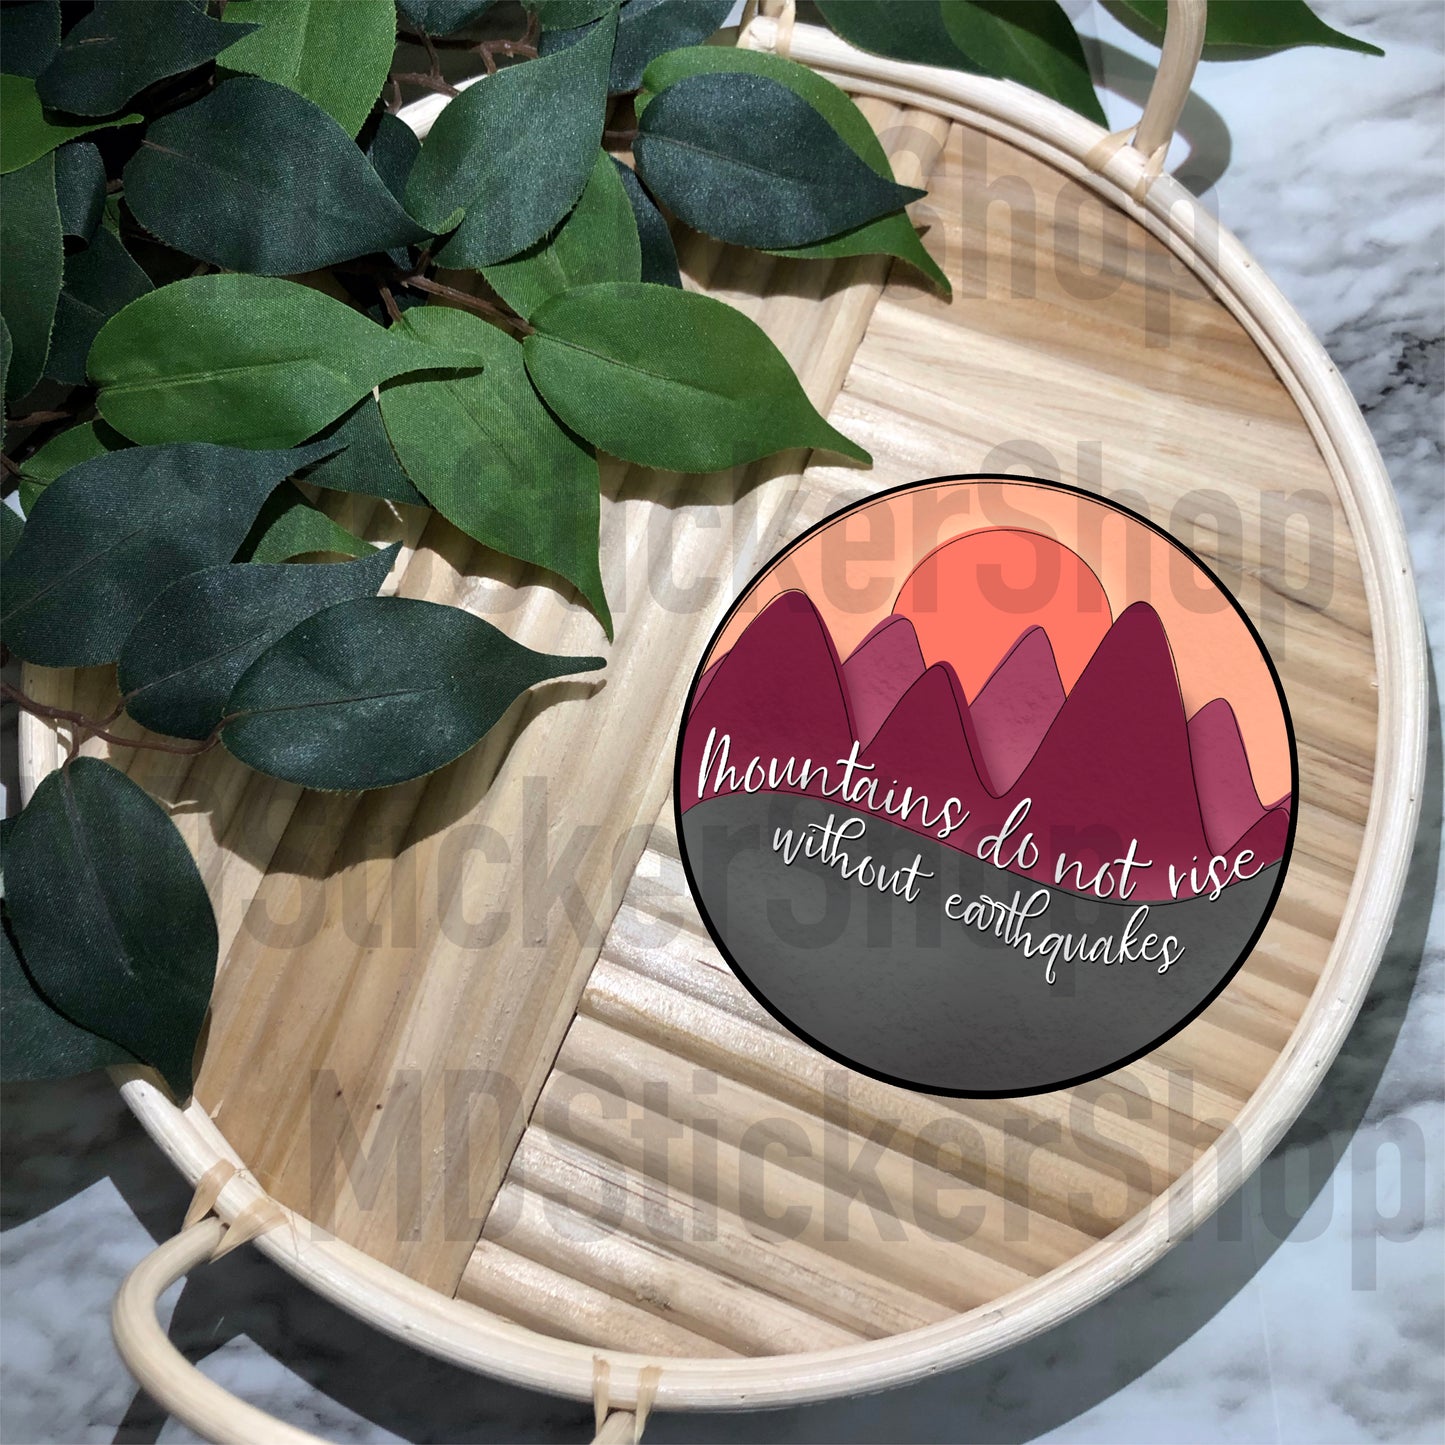 Mountains Do Not Rise Without Earthquakes Vinyl Sticker